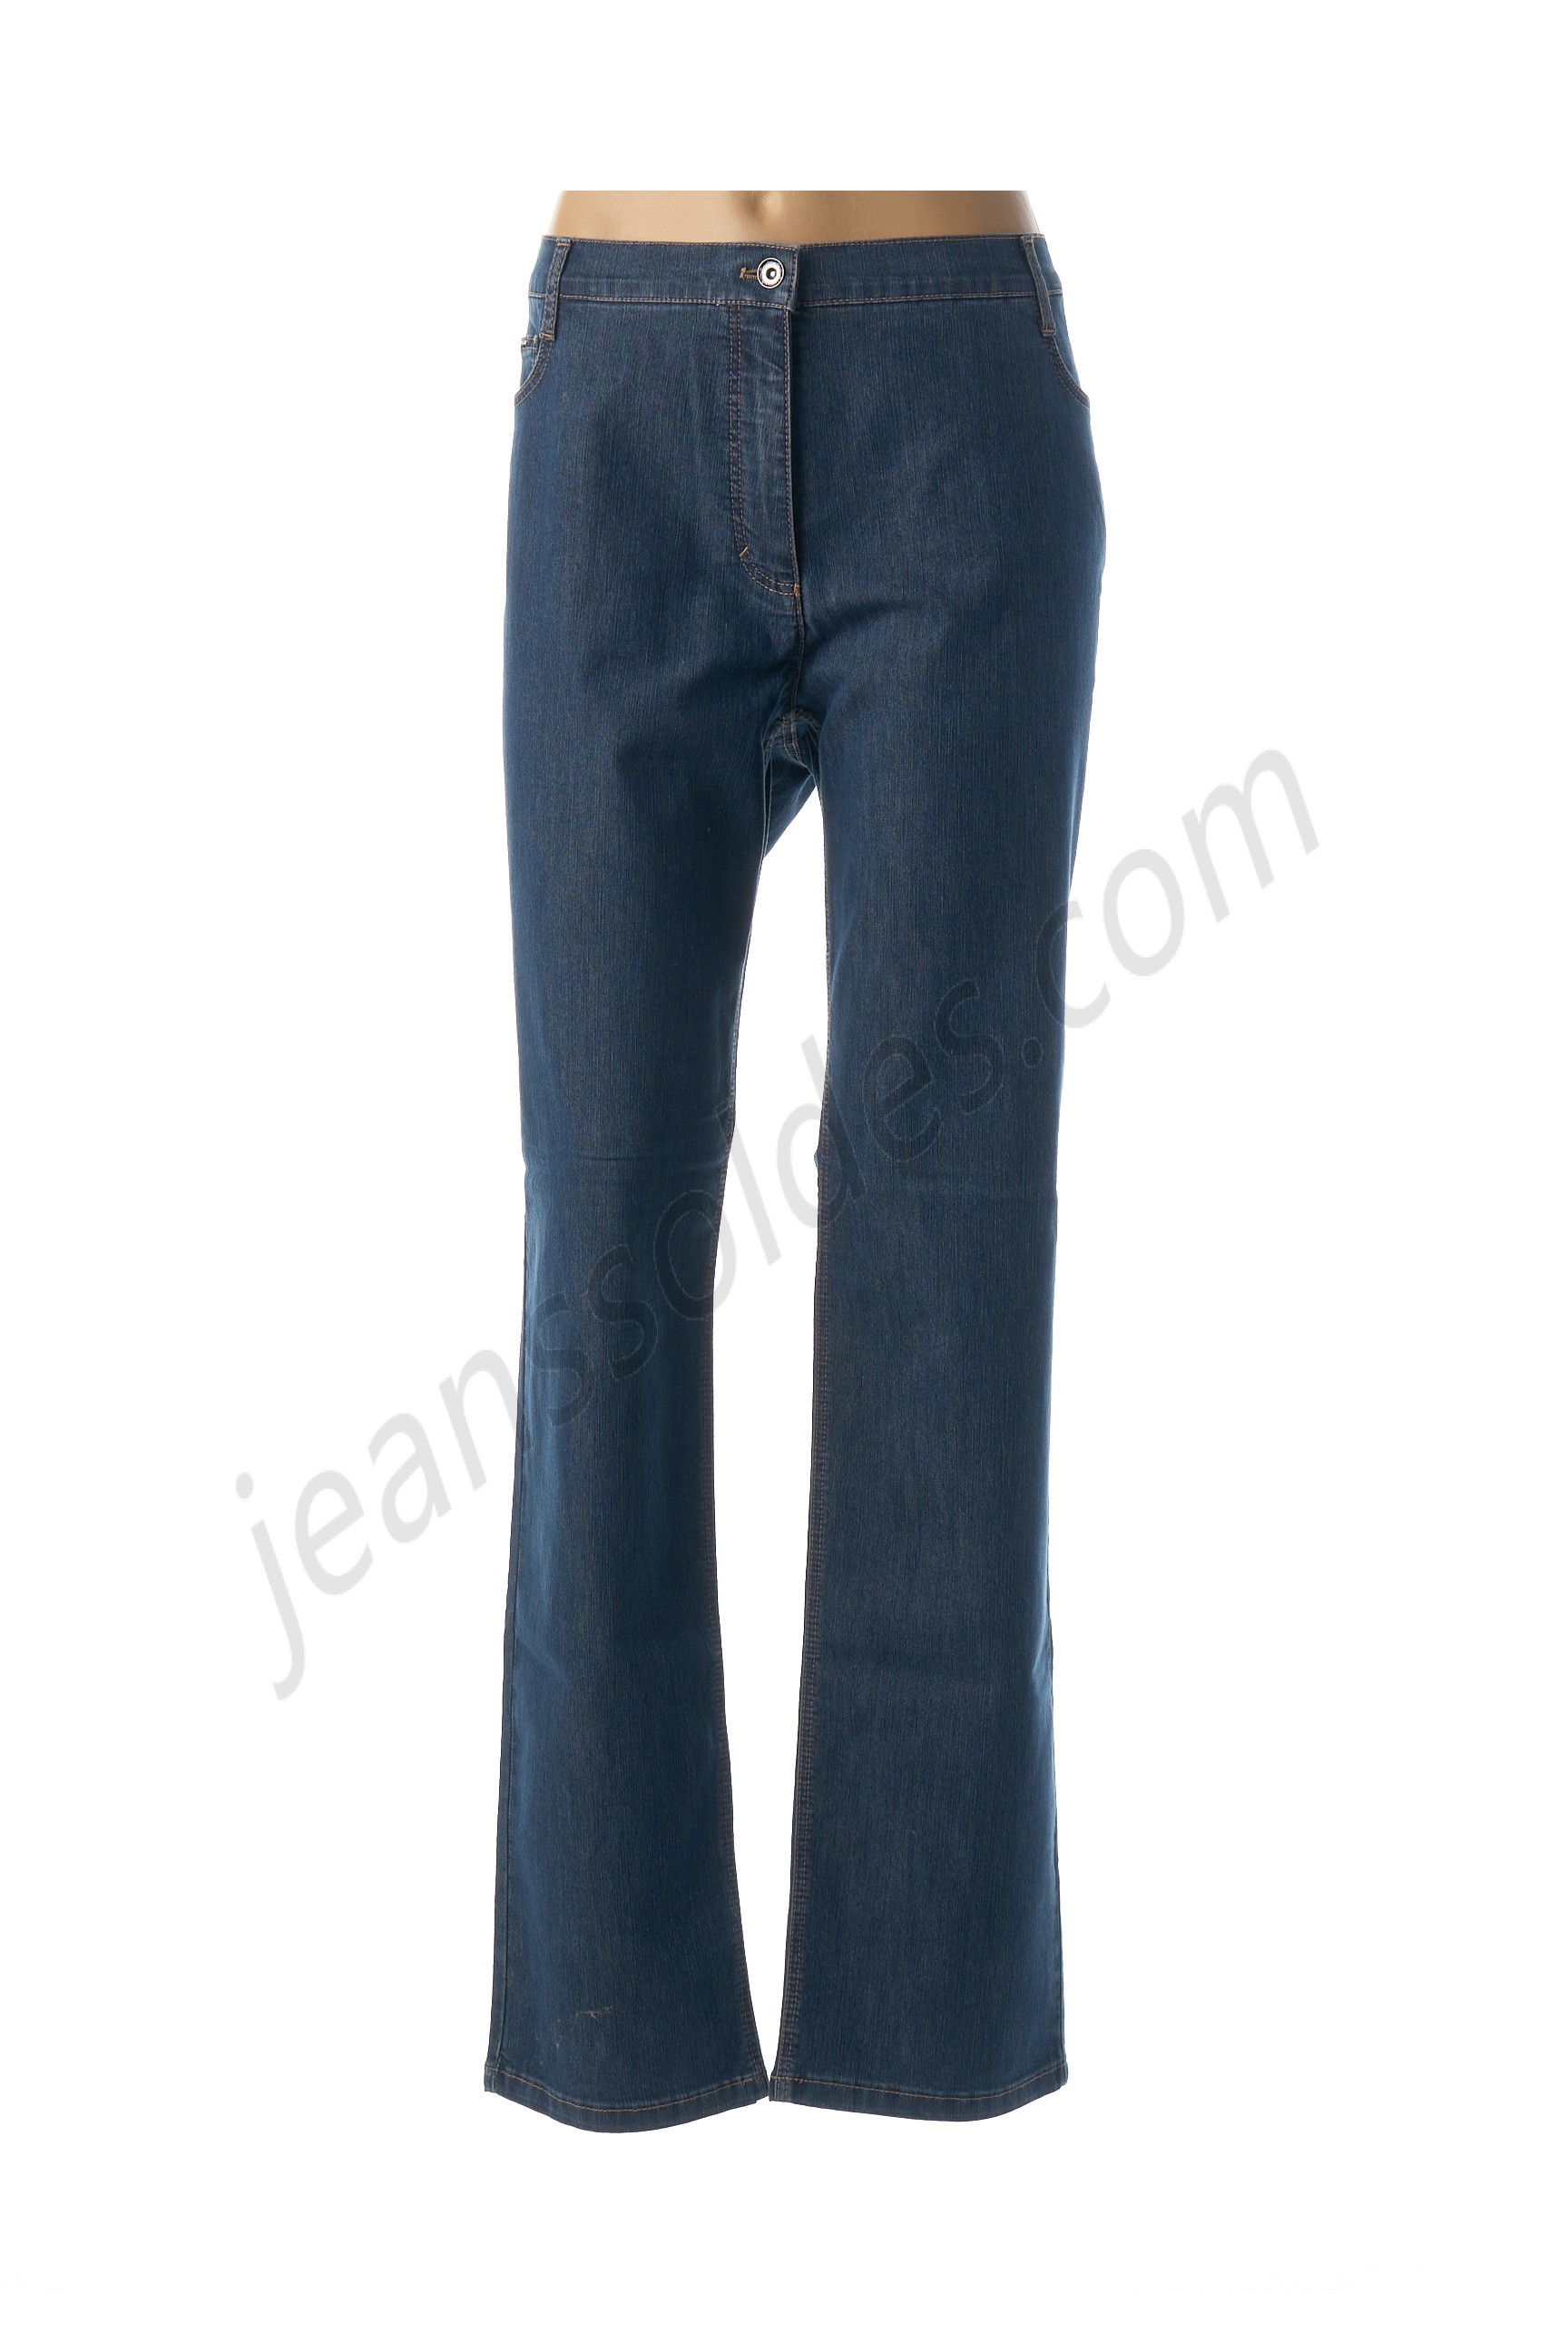 betty barclay-Jeans coupe droite prix d’amis - betty barclay-Jeans coupe droite prix d’amis